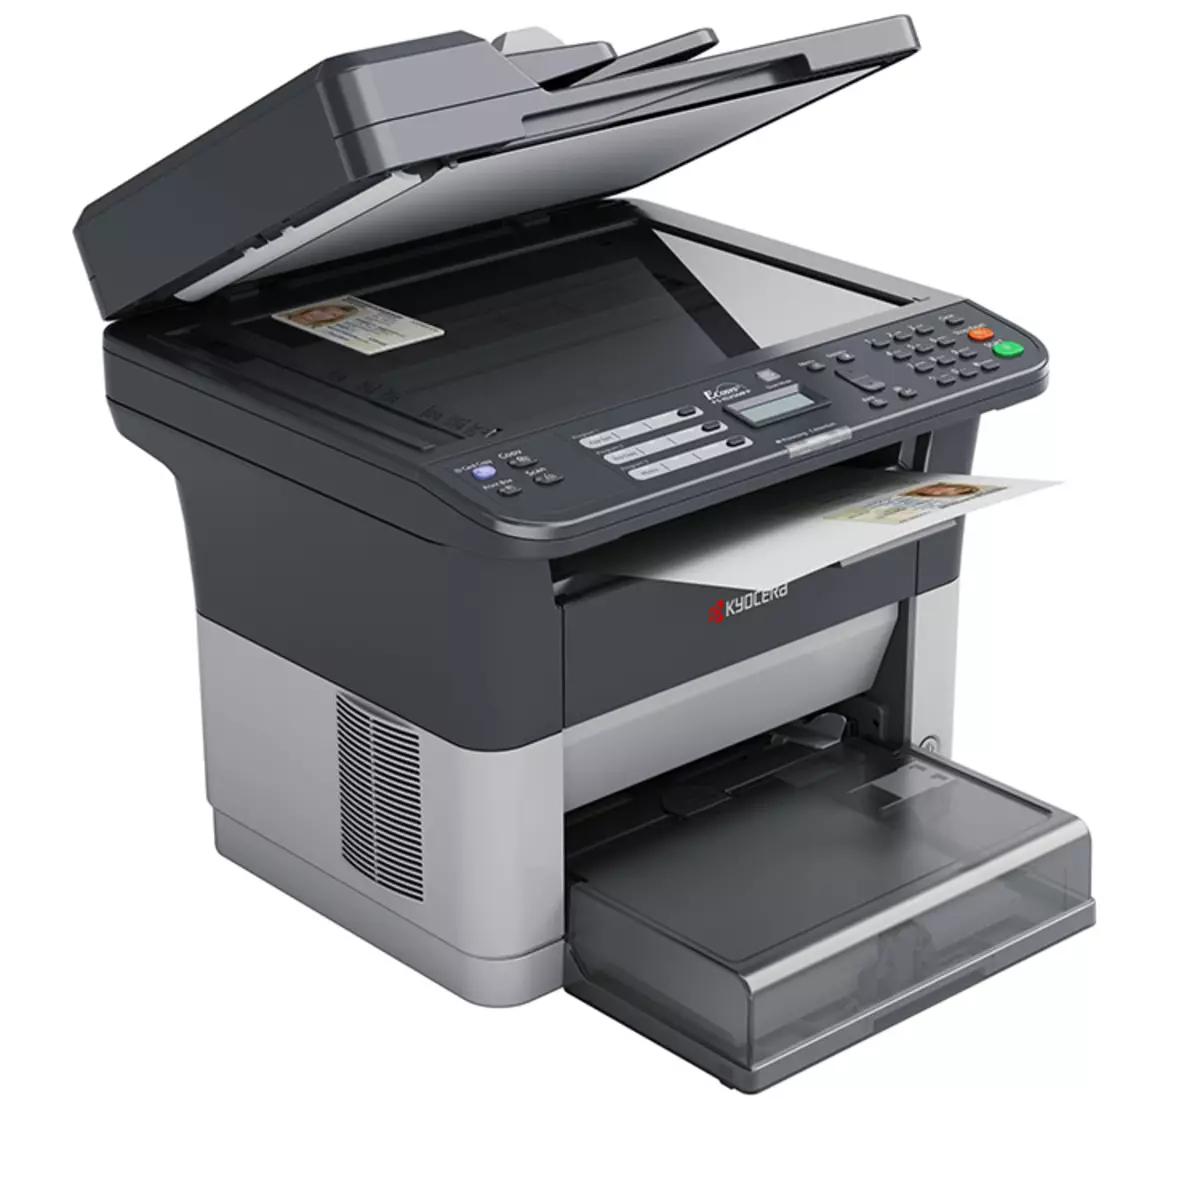 Download drivers for Kyocera FS-1025MFP